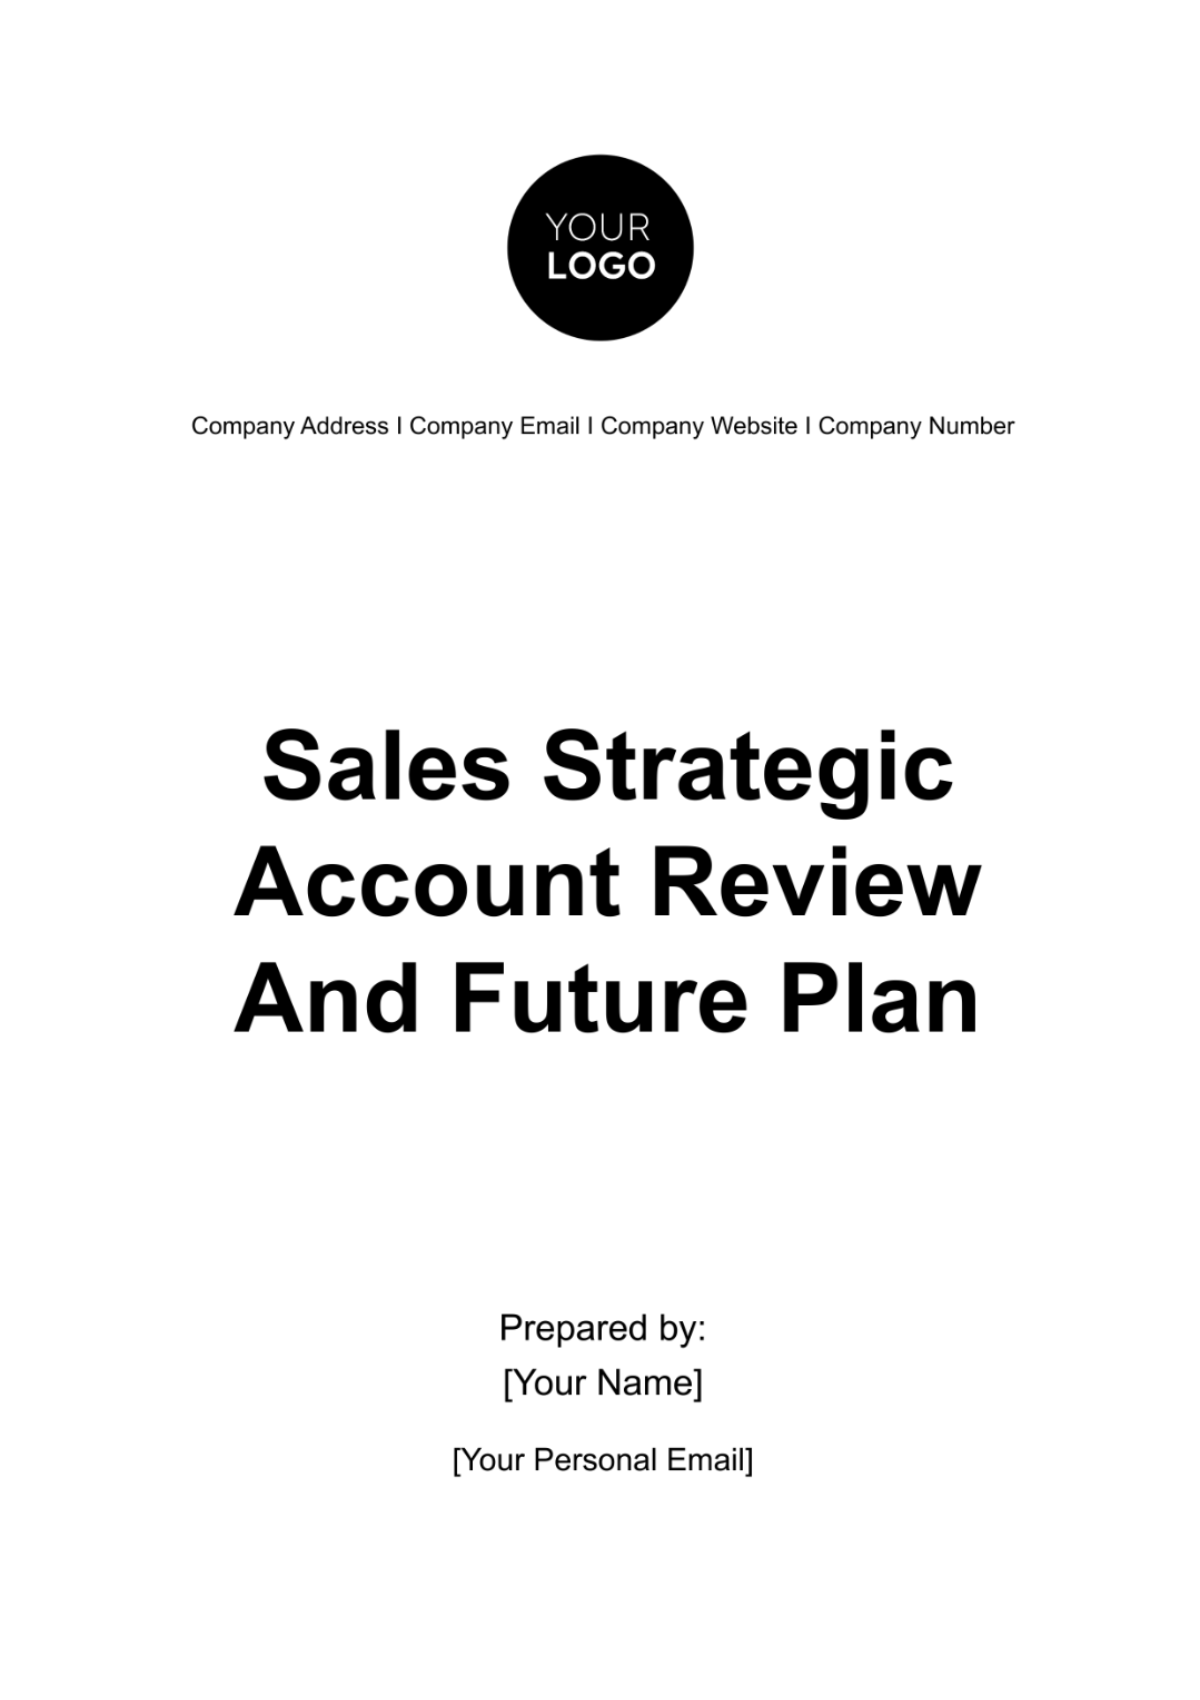 Free Sales Strategic Account Review and Future Plan Template